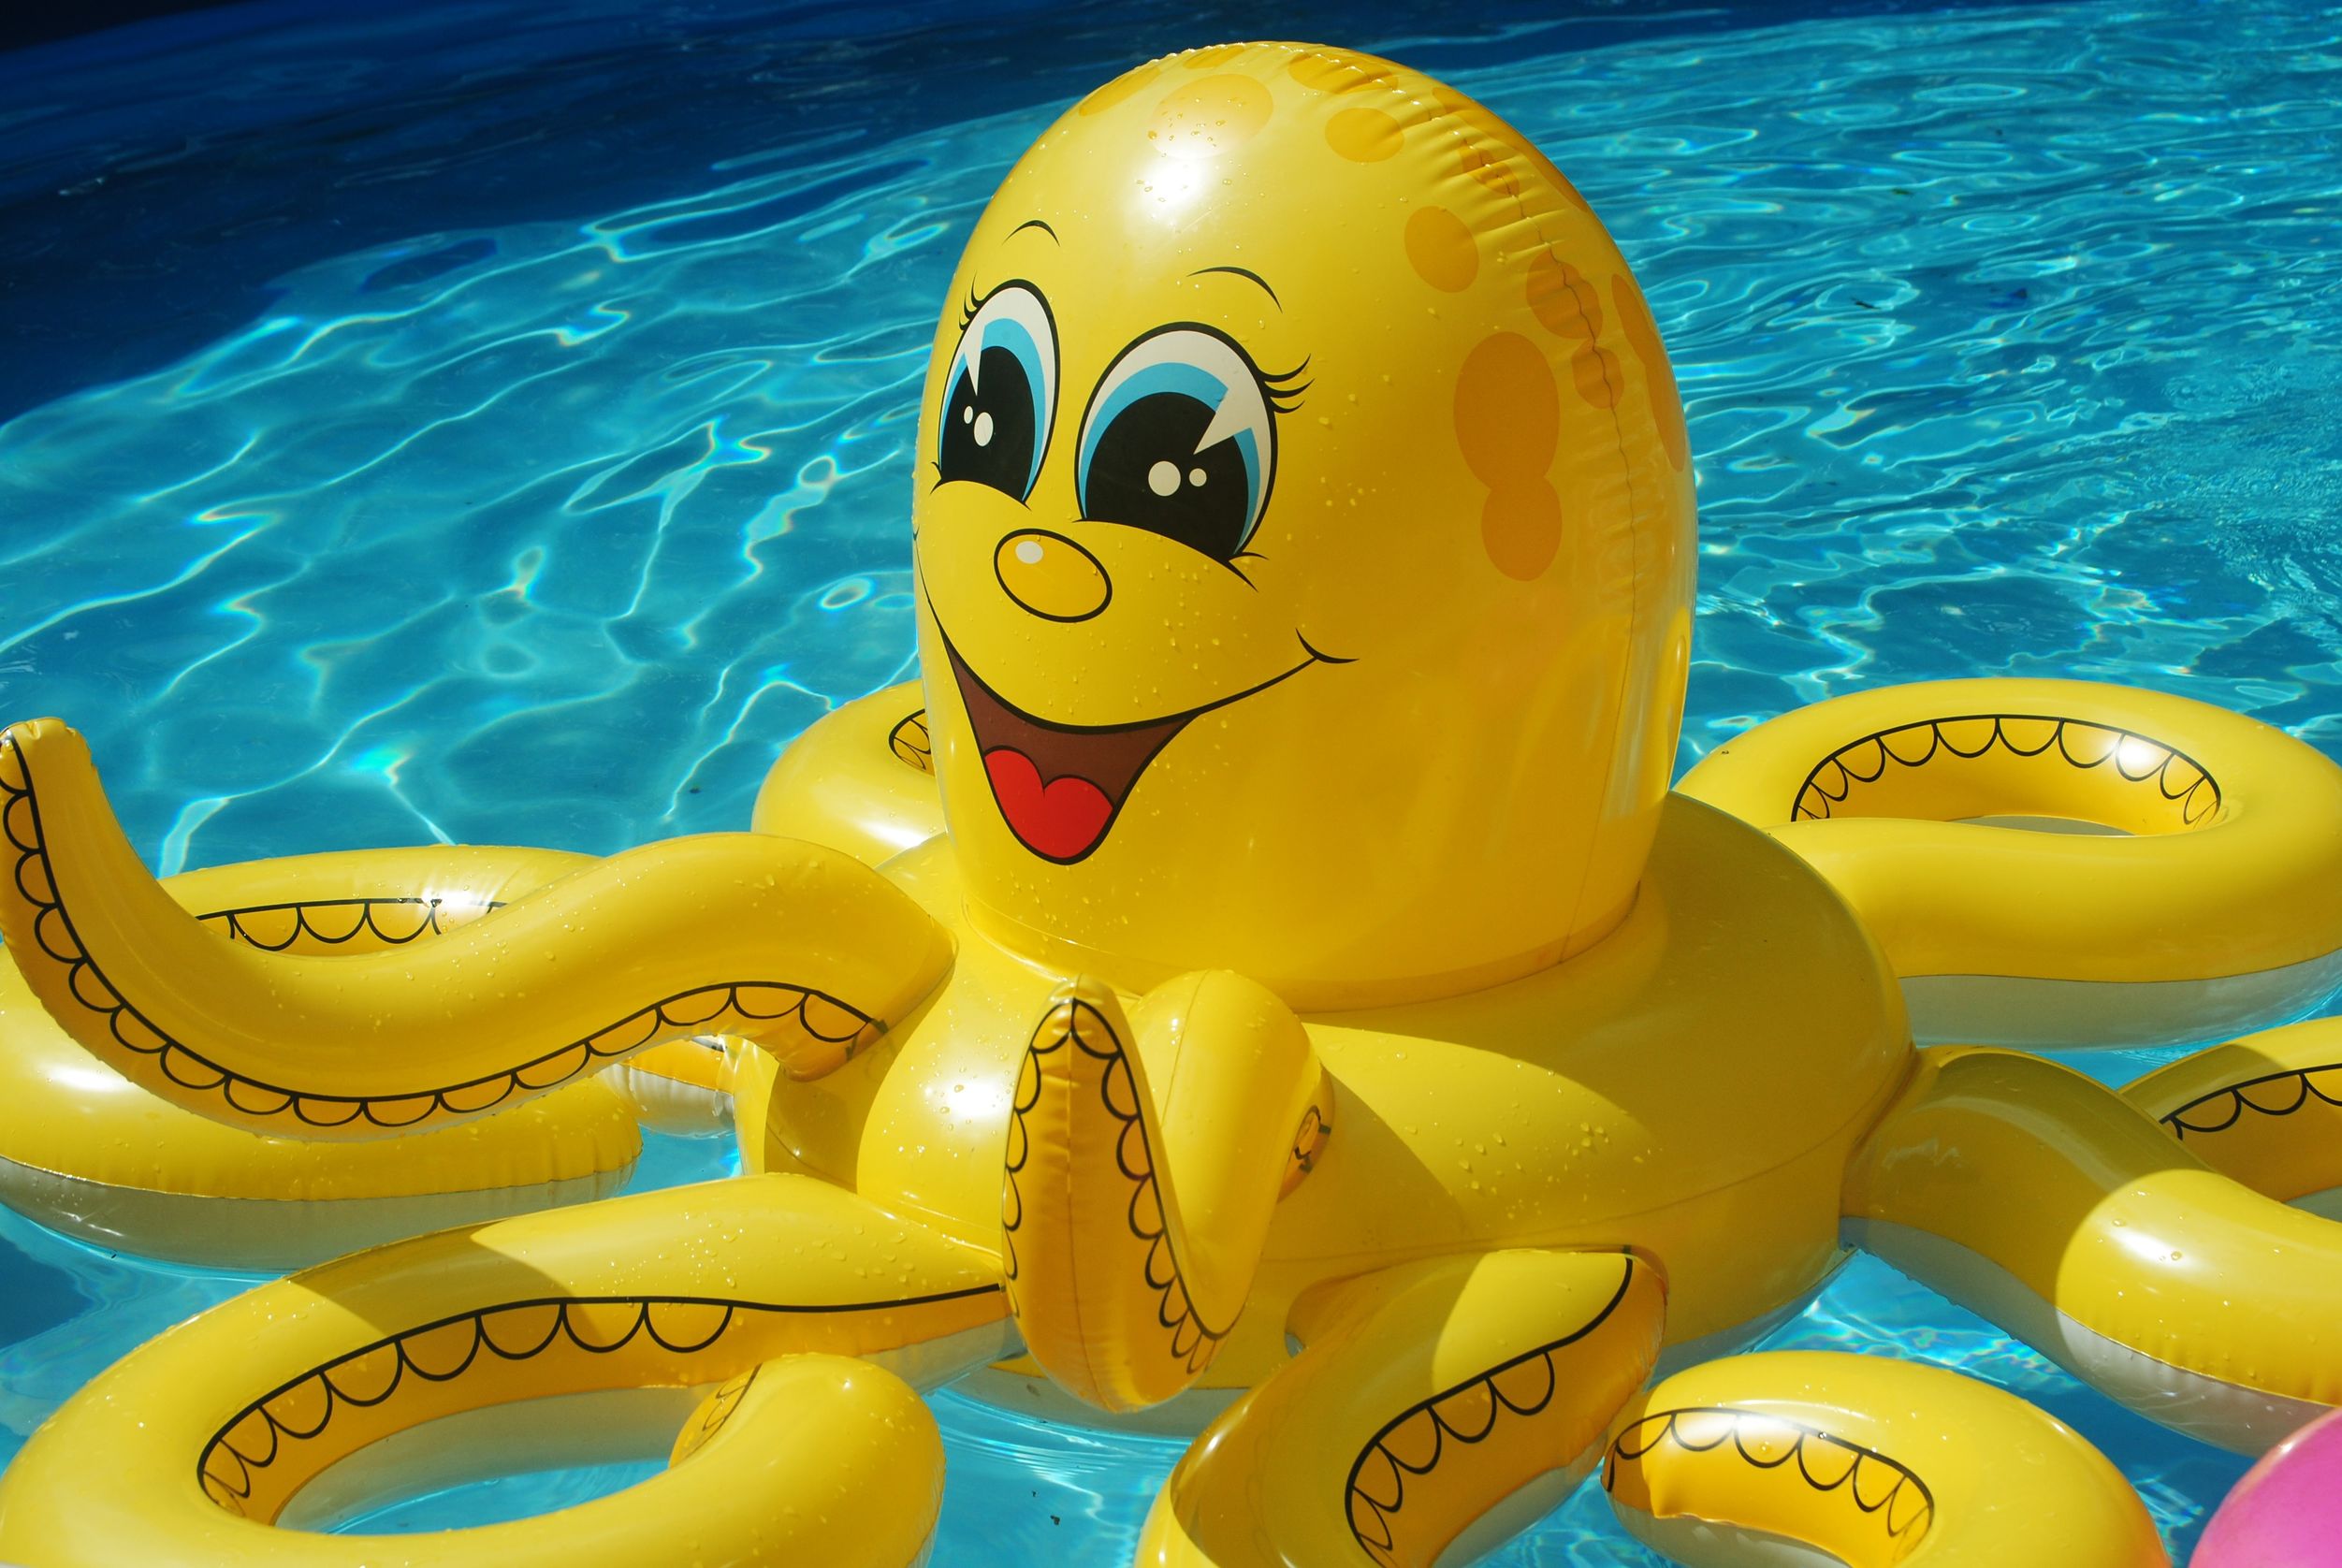 swimming pool toys and floats